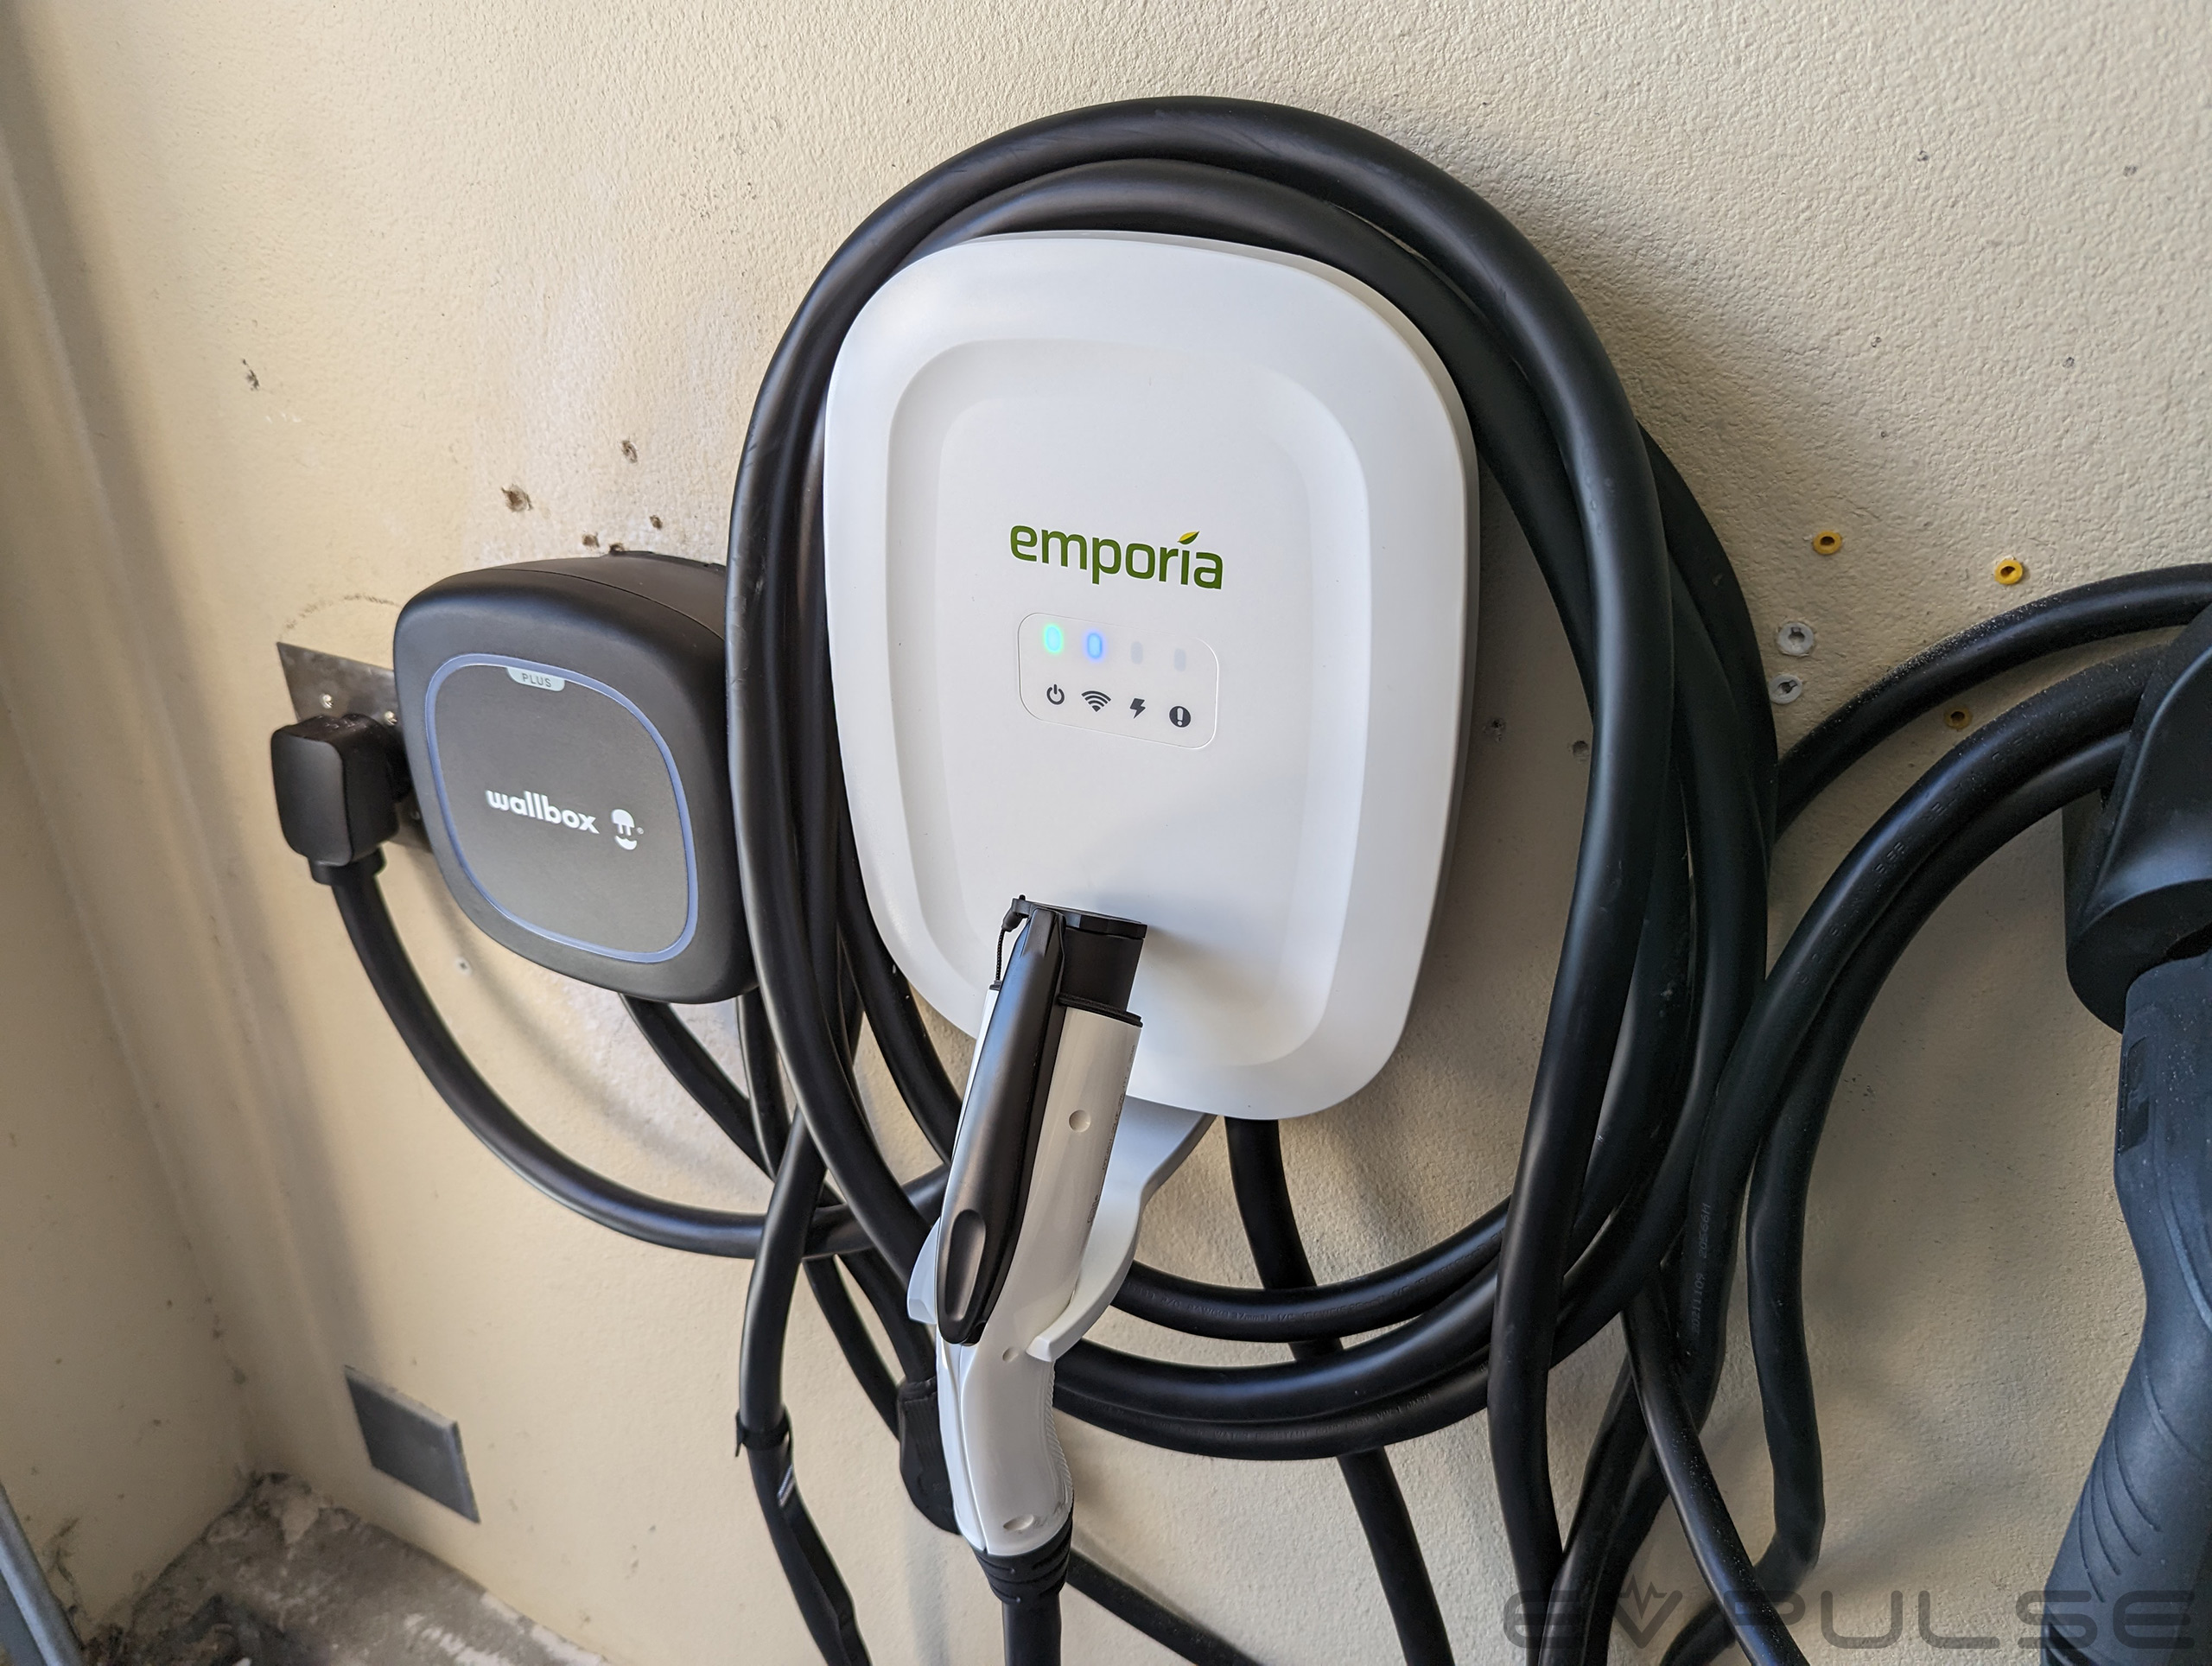 emporia home ev charger hands on review